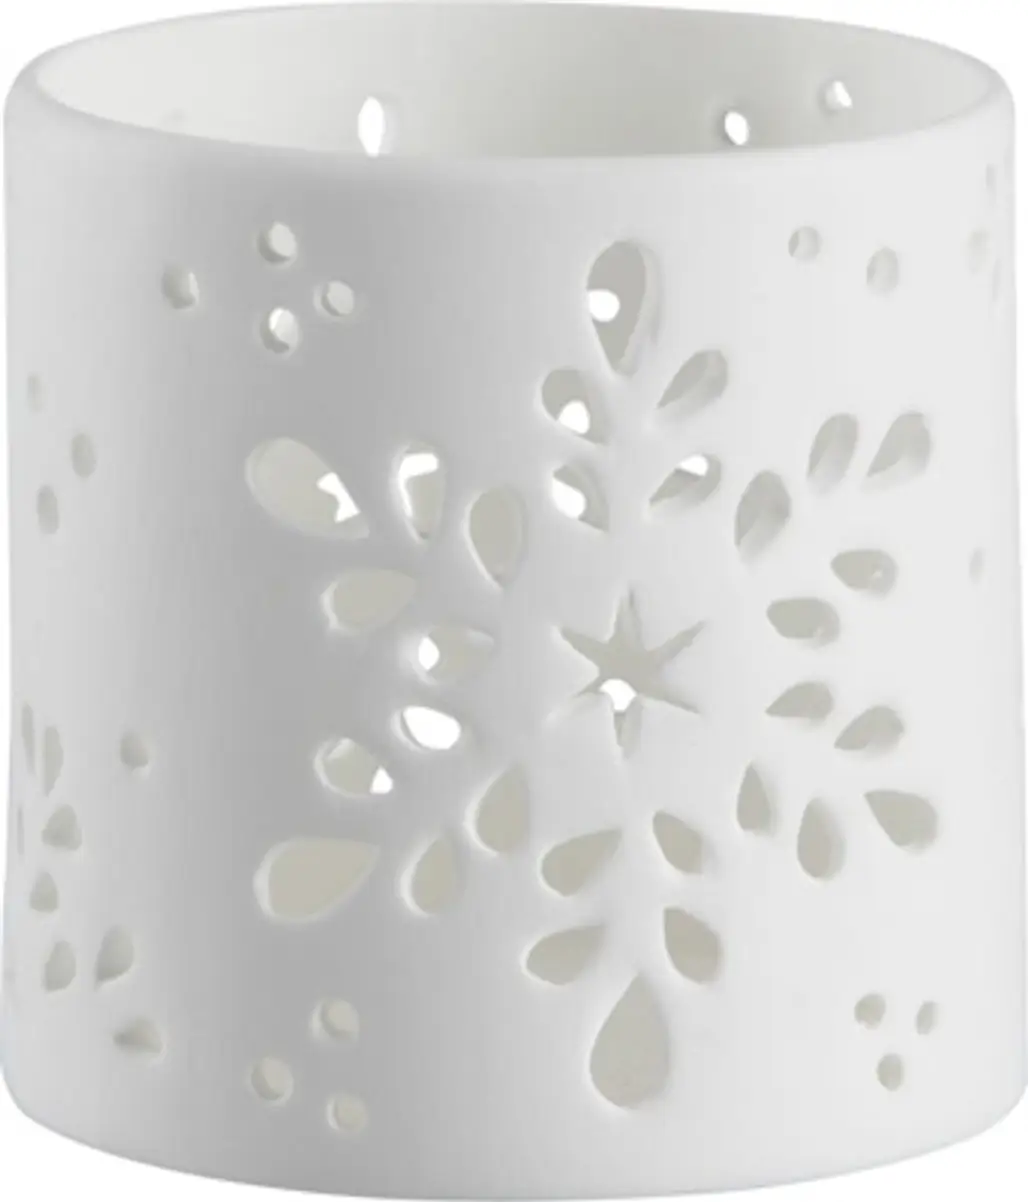 Snowflake Candle Holder